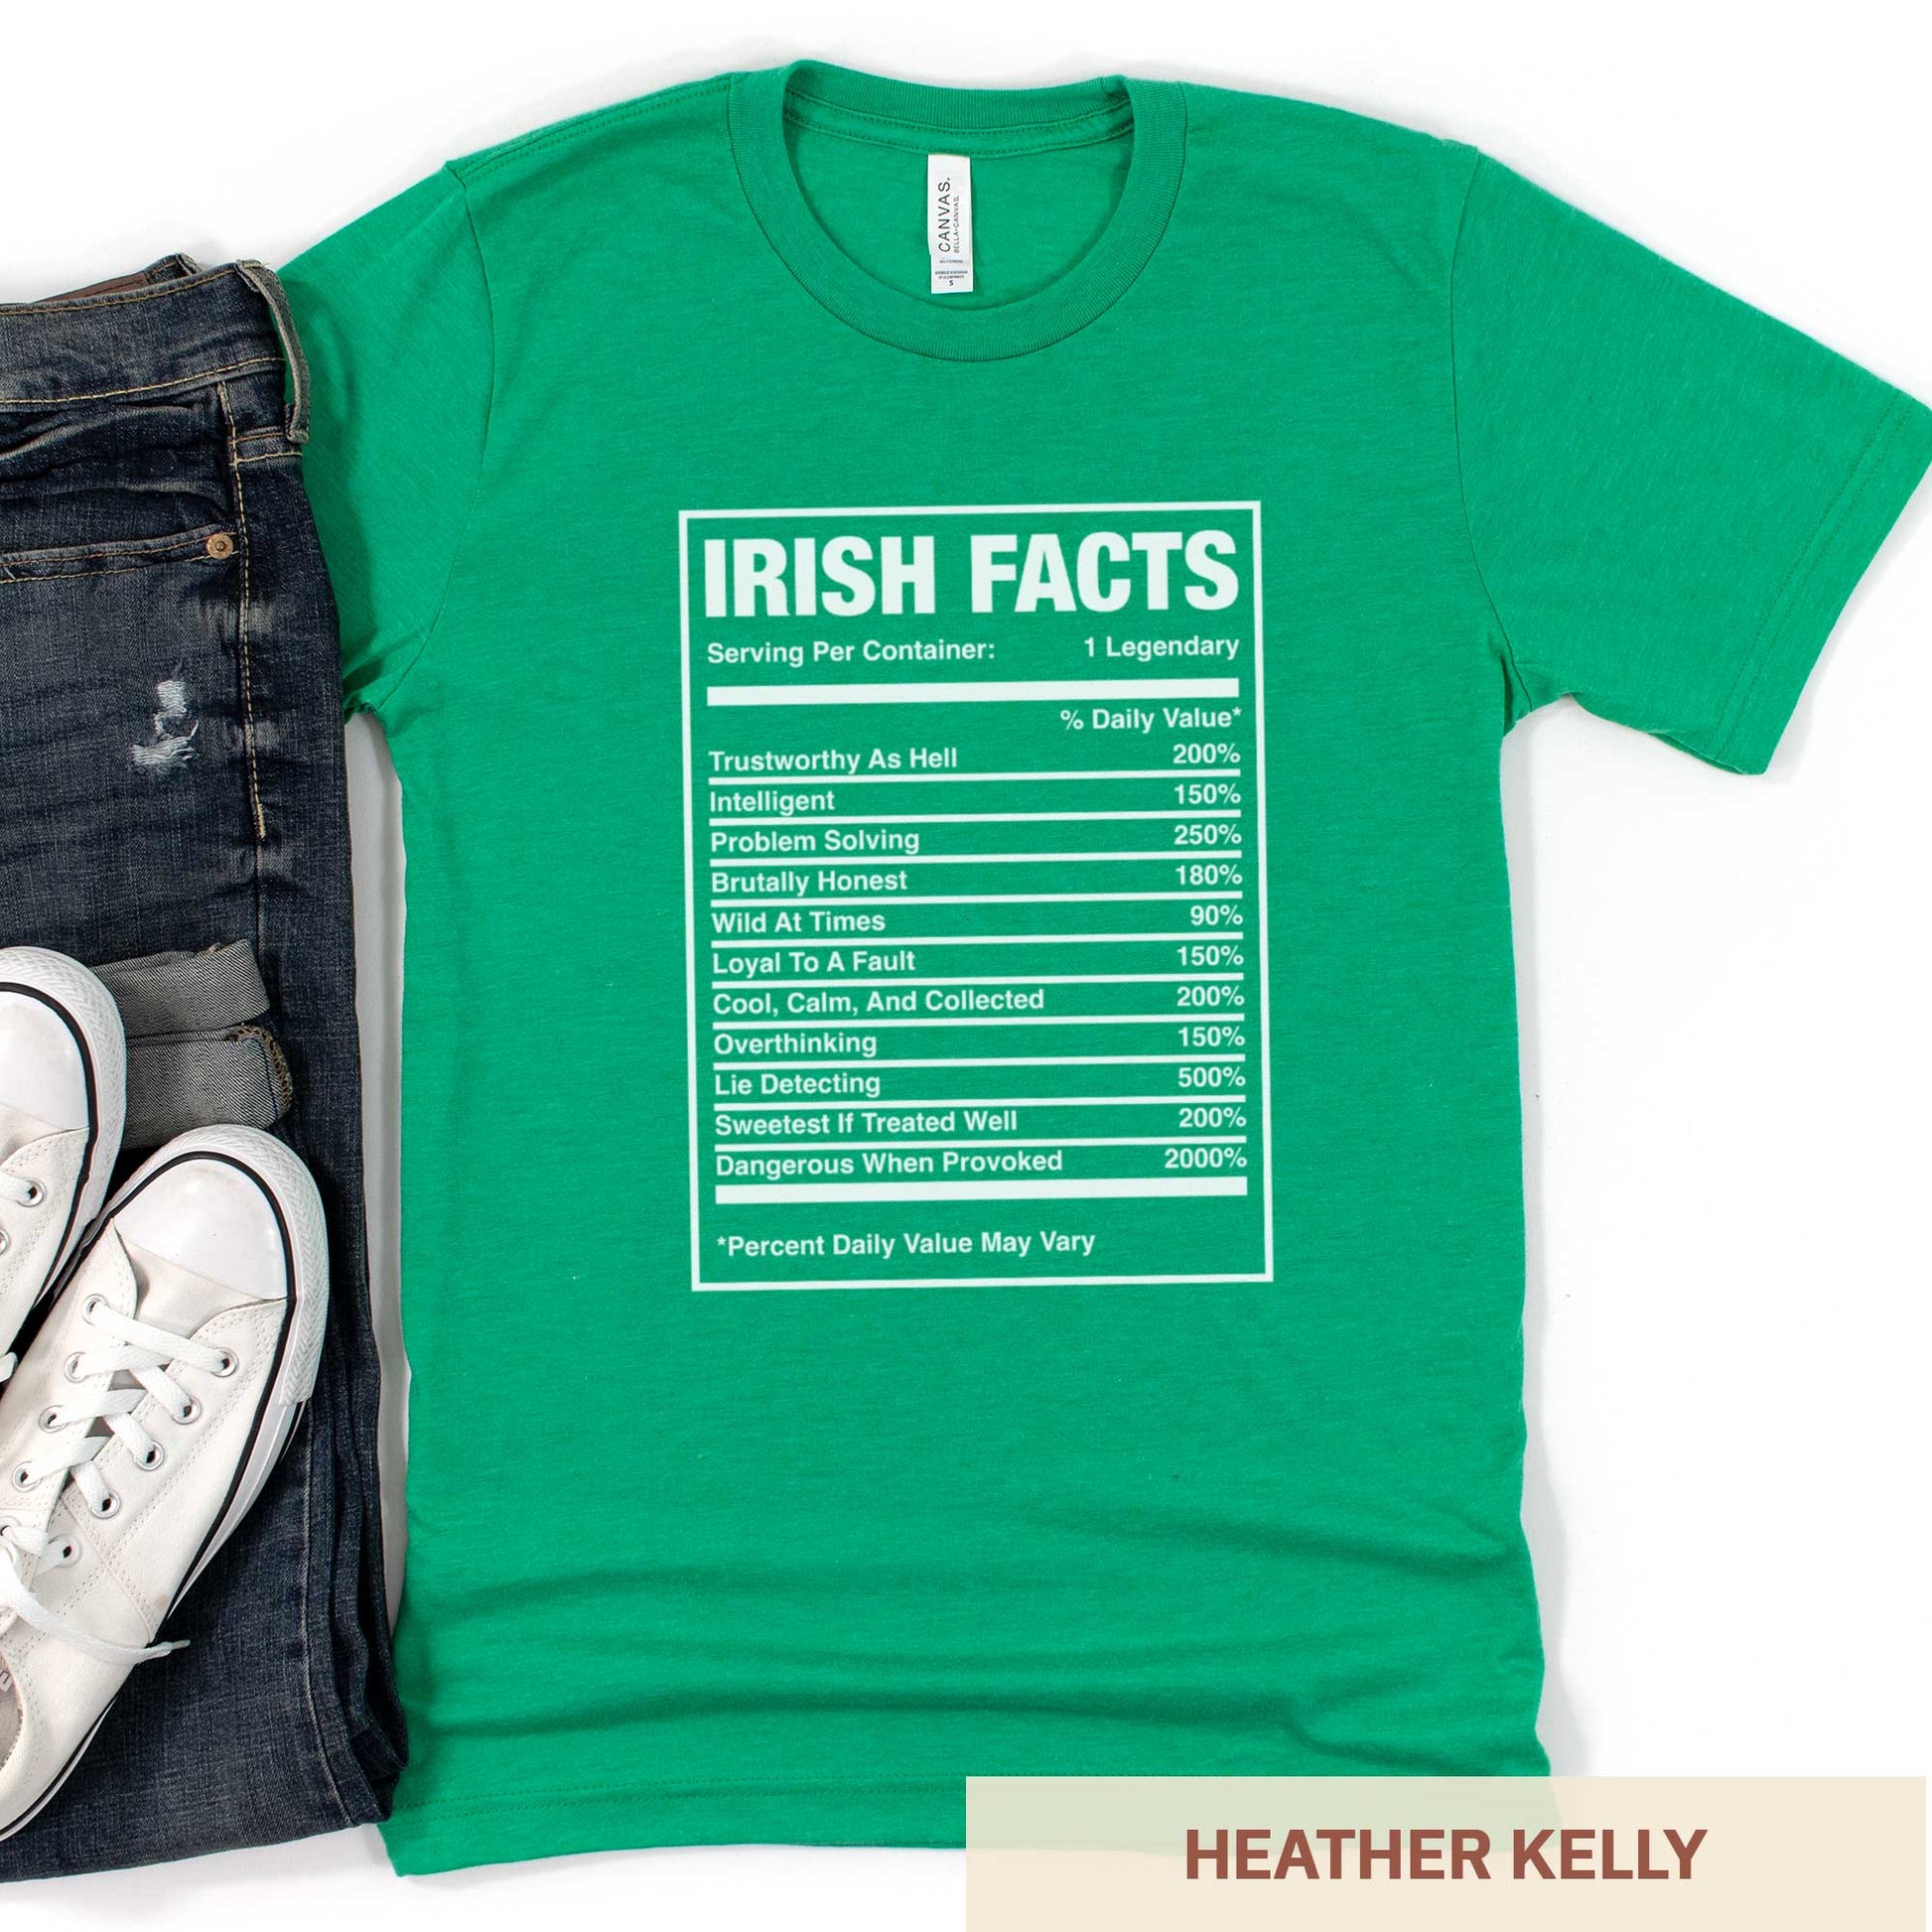 A heather kelly Bella Canvas t-shirt that features a nutrition facts chart of Irish characteristics.